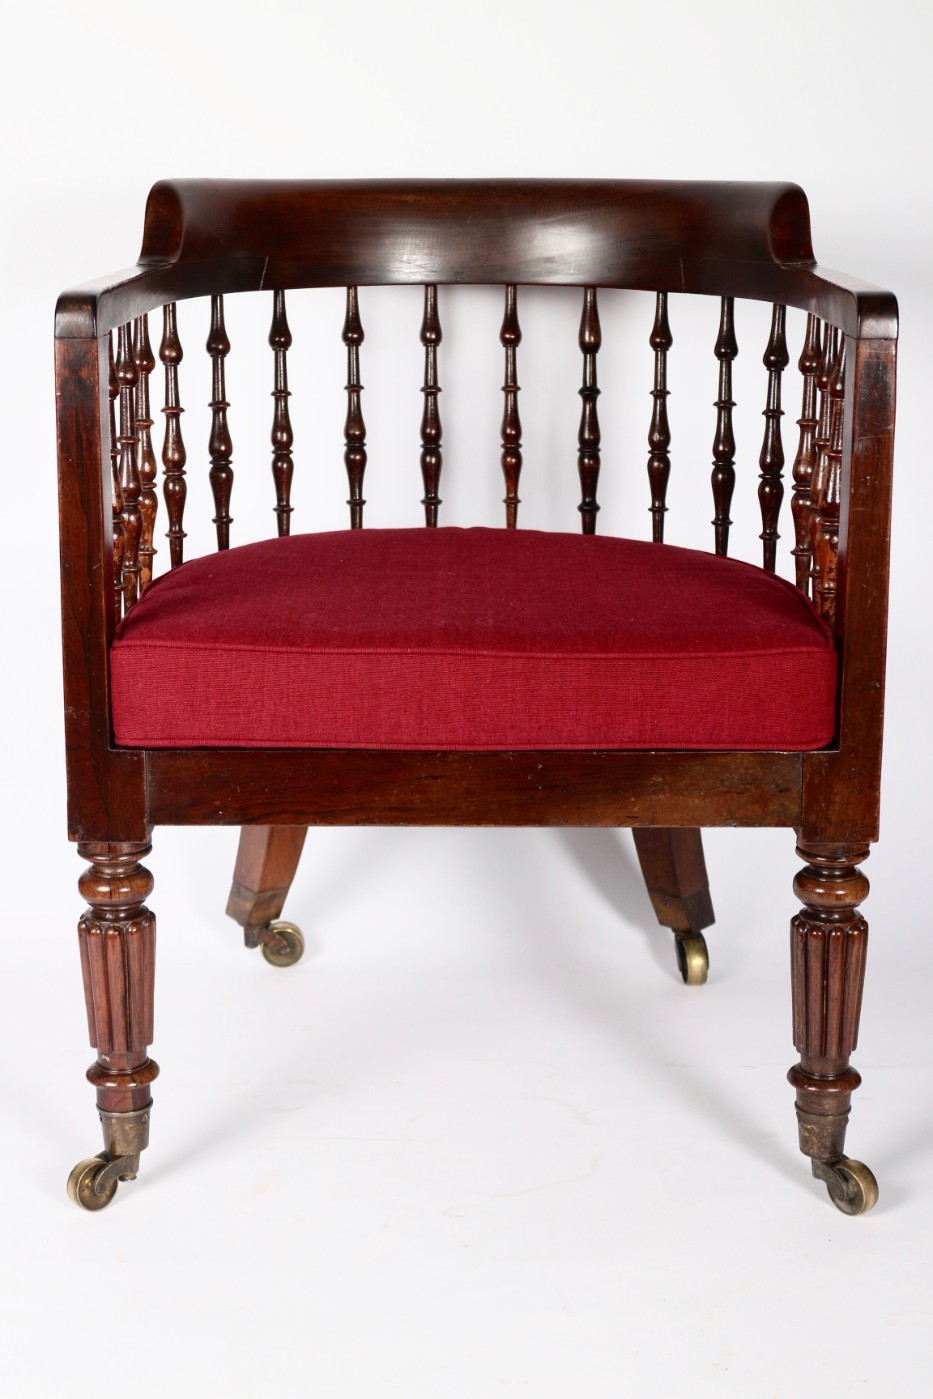 William the IVth armchair in mahogany